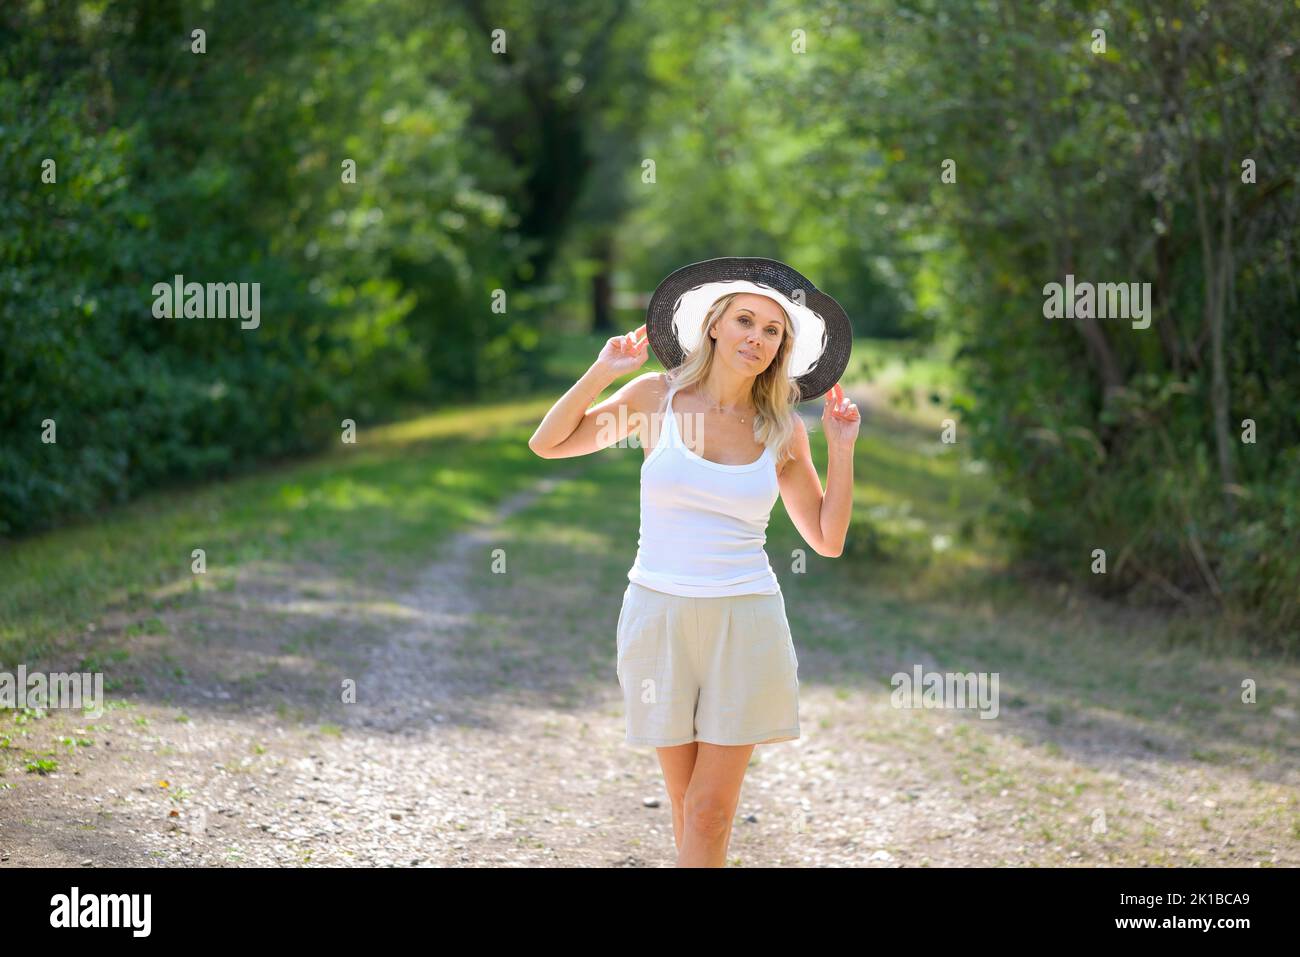 Attractive blond woman smiling friendly wearing a black and white summer hat in a white top with her hands on the hat in front of greenery Stock Photo